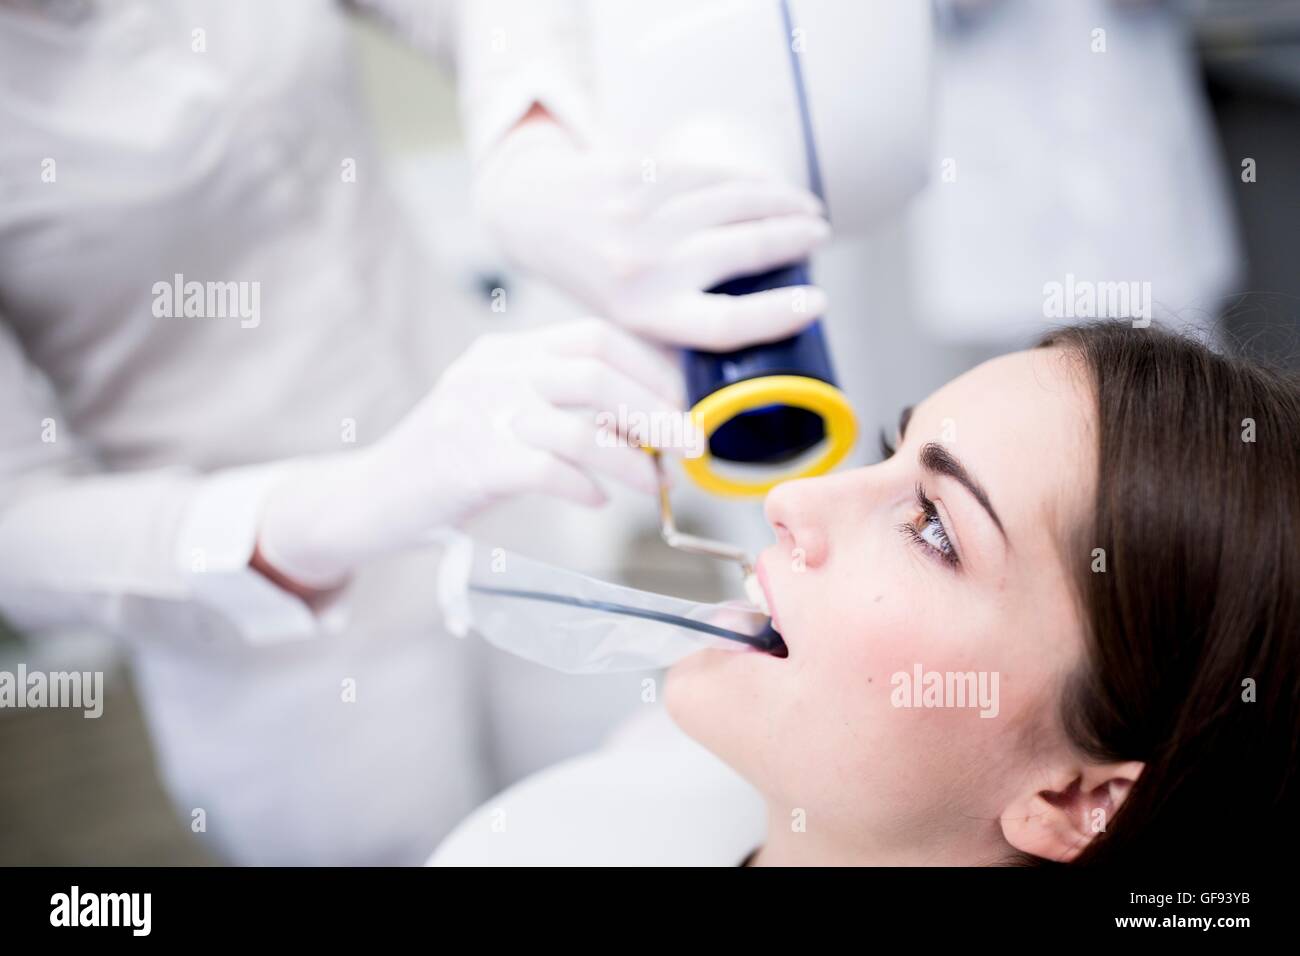 MODEL RELEASED. Young woman having dental x-ray in clinic. Stock Photo